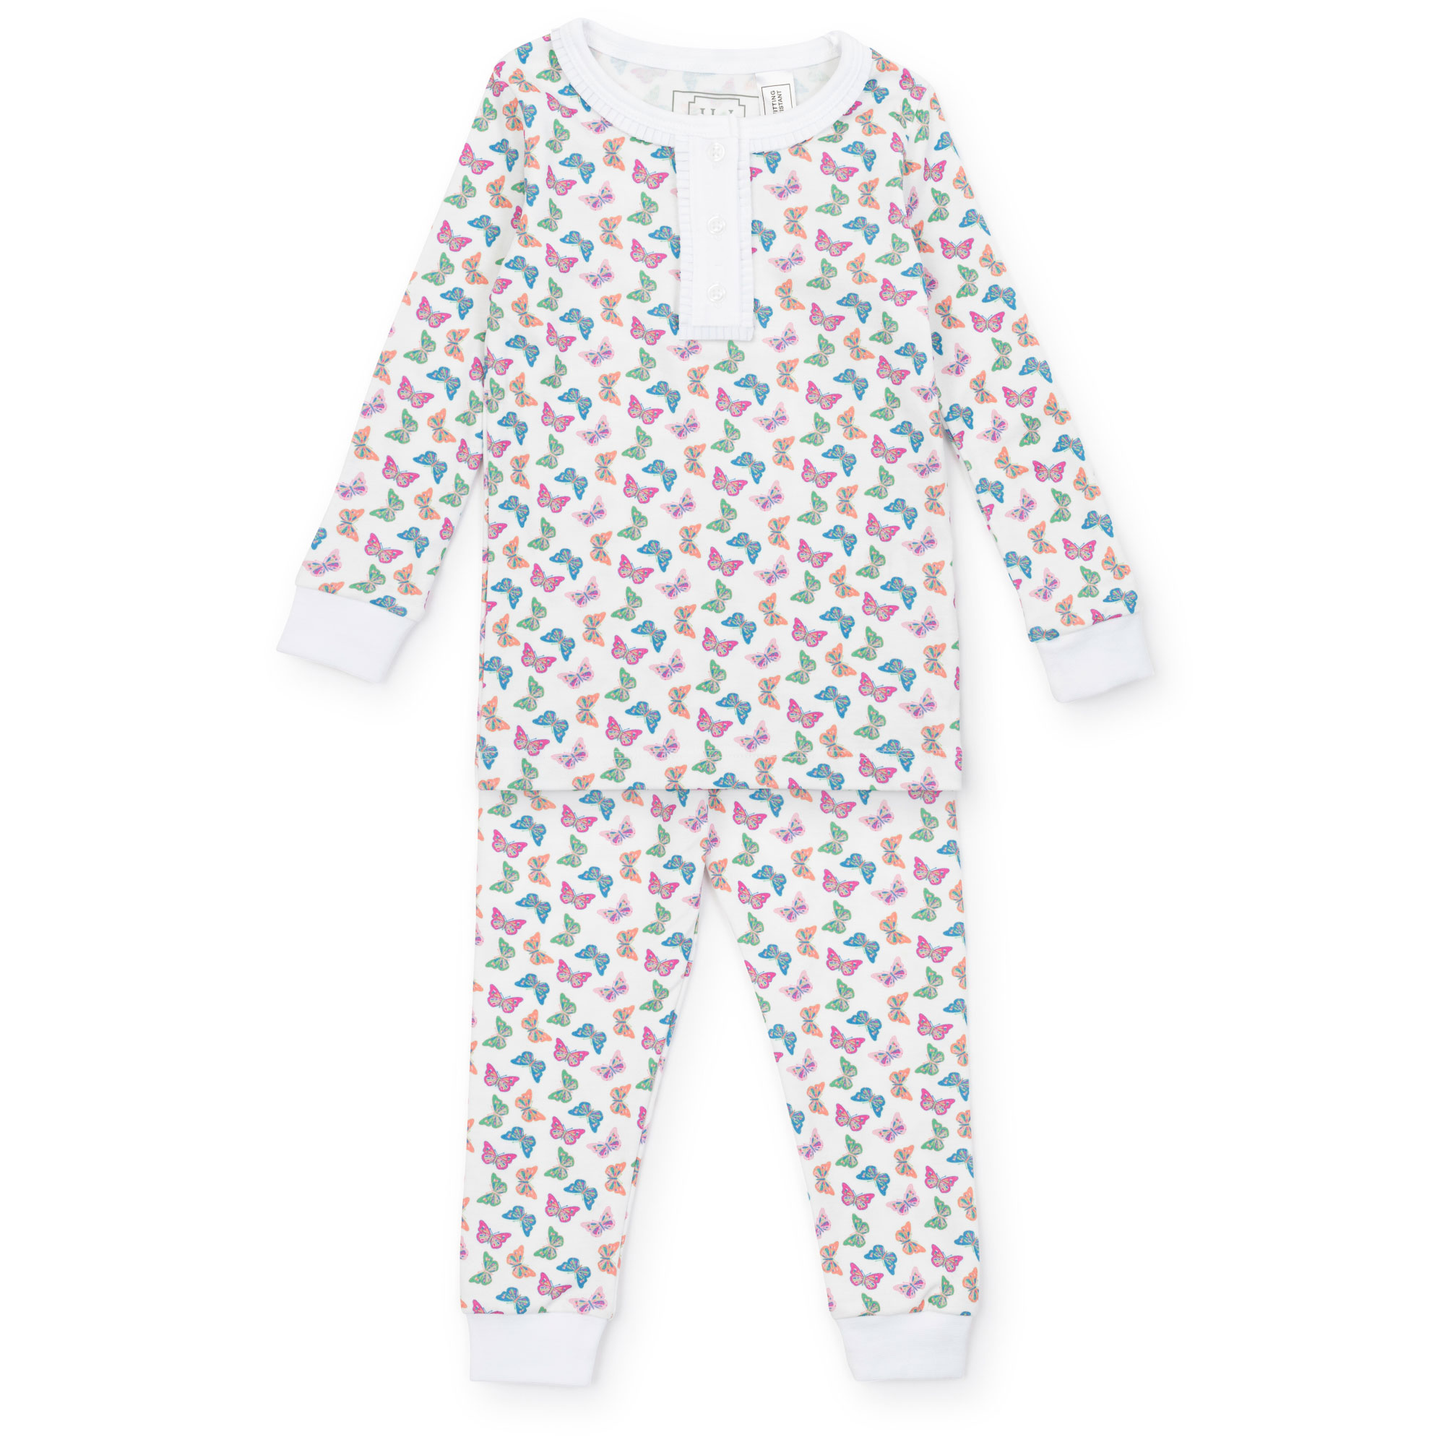 Lila and Hayes Alden Girls' Pima Cotton Pajama Pant Set - Bright Butterflies